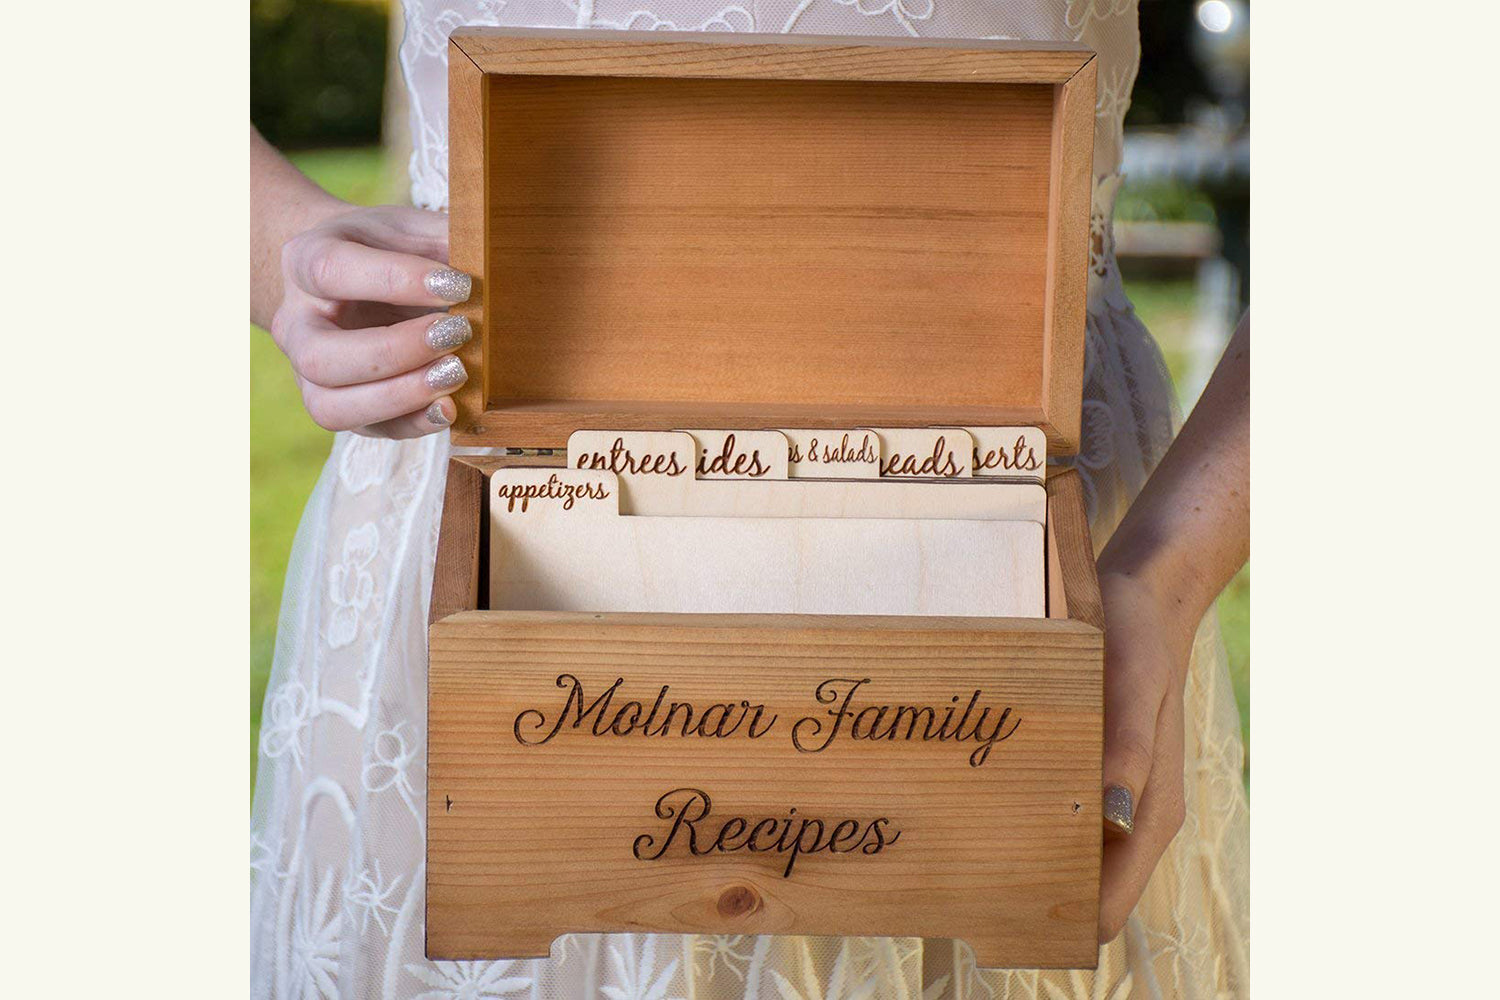 Wooden box for cards, Personalized gift, Wedding card box